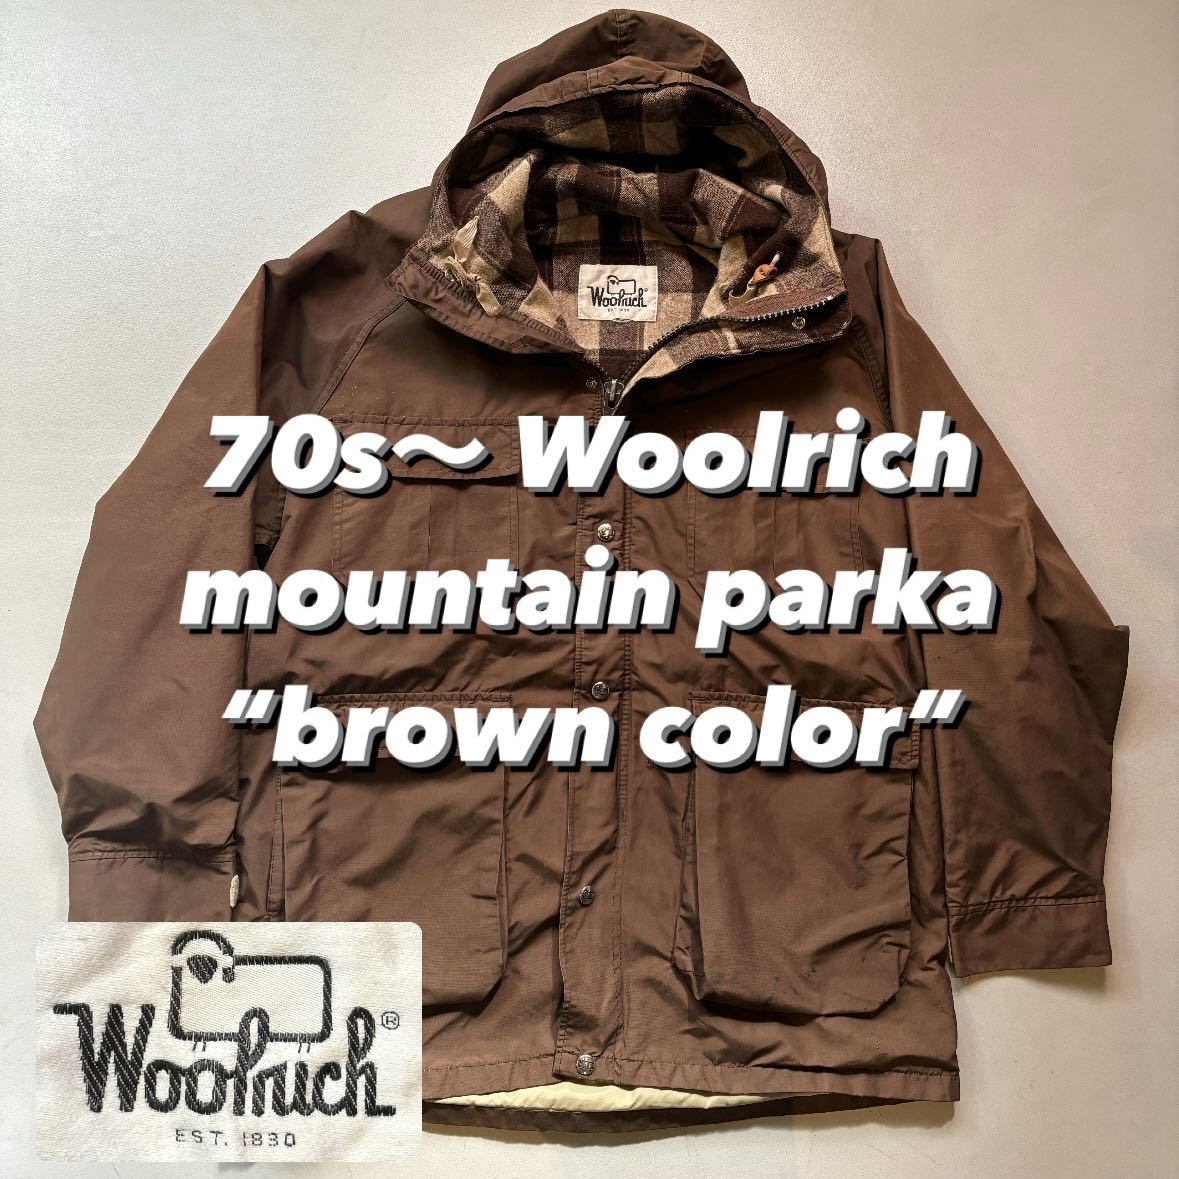 70s〜 Woolrich mountain parka “brown color” 70年代 ウールリッチ マウンテンパーカ 茶色_画像1